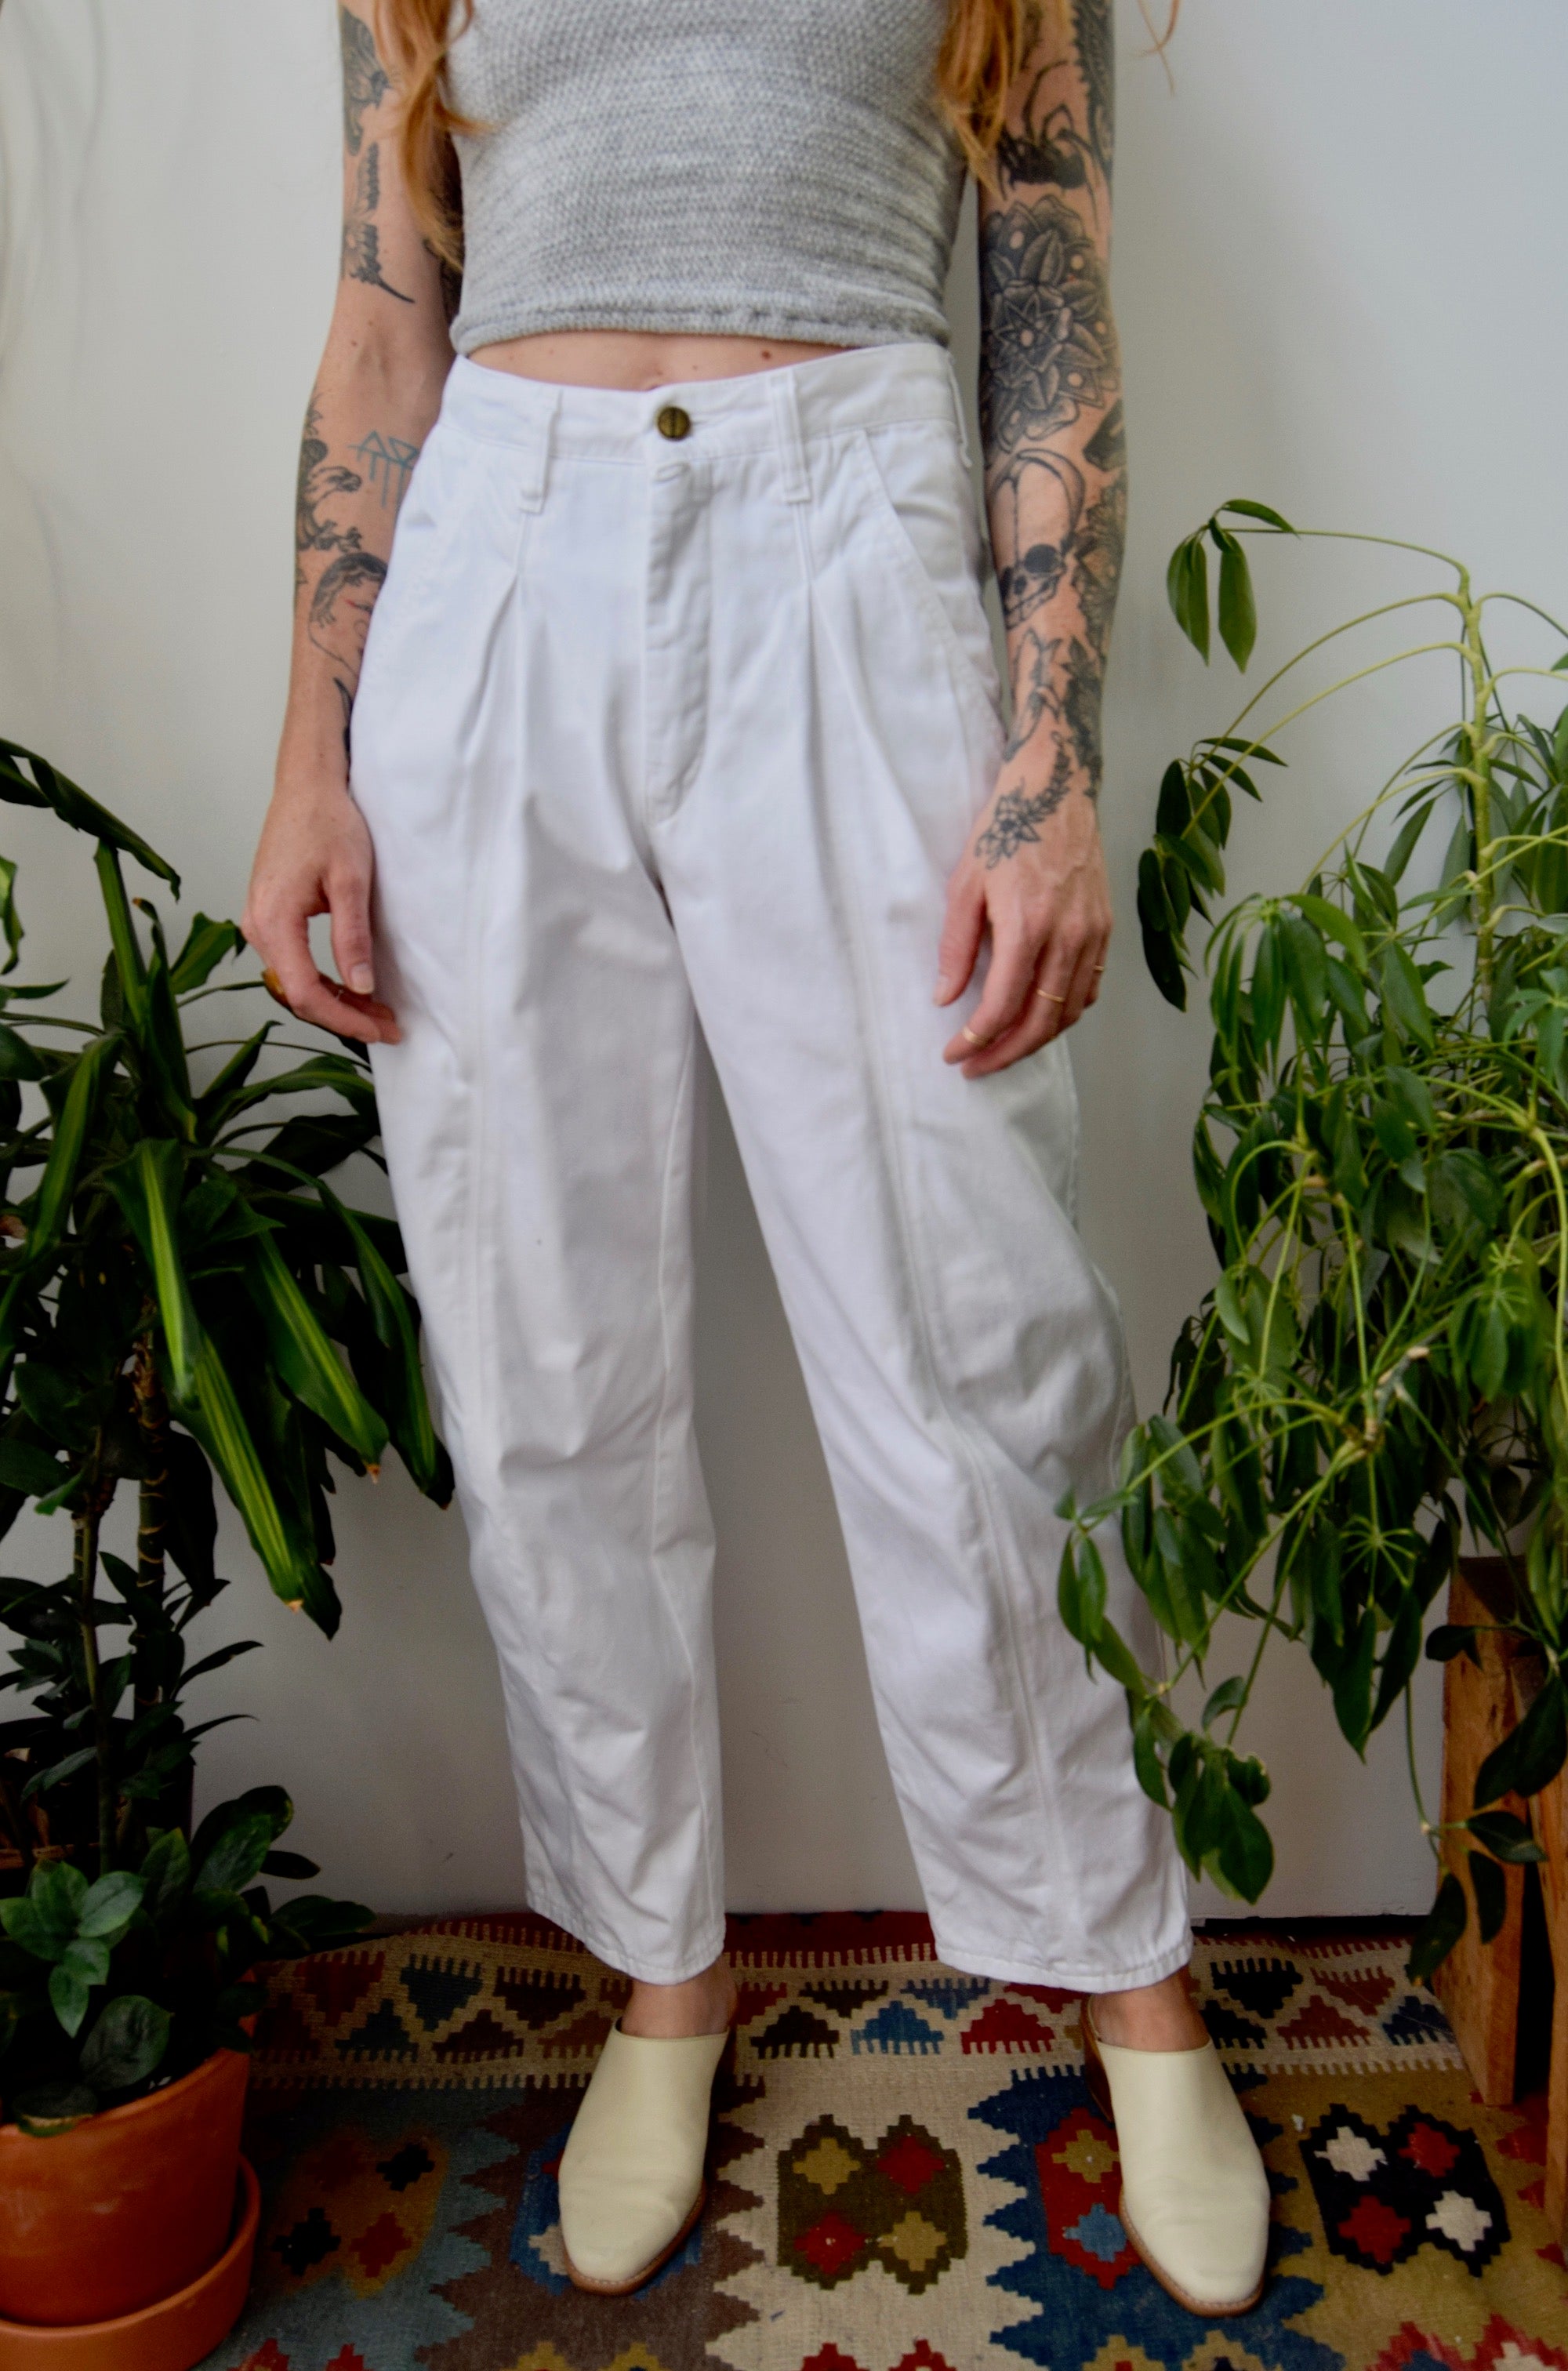 Marithe & Francois Girbaud "Complements" Trousers